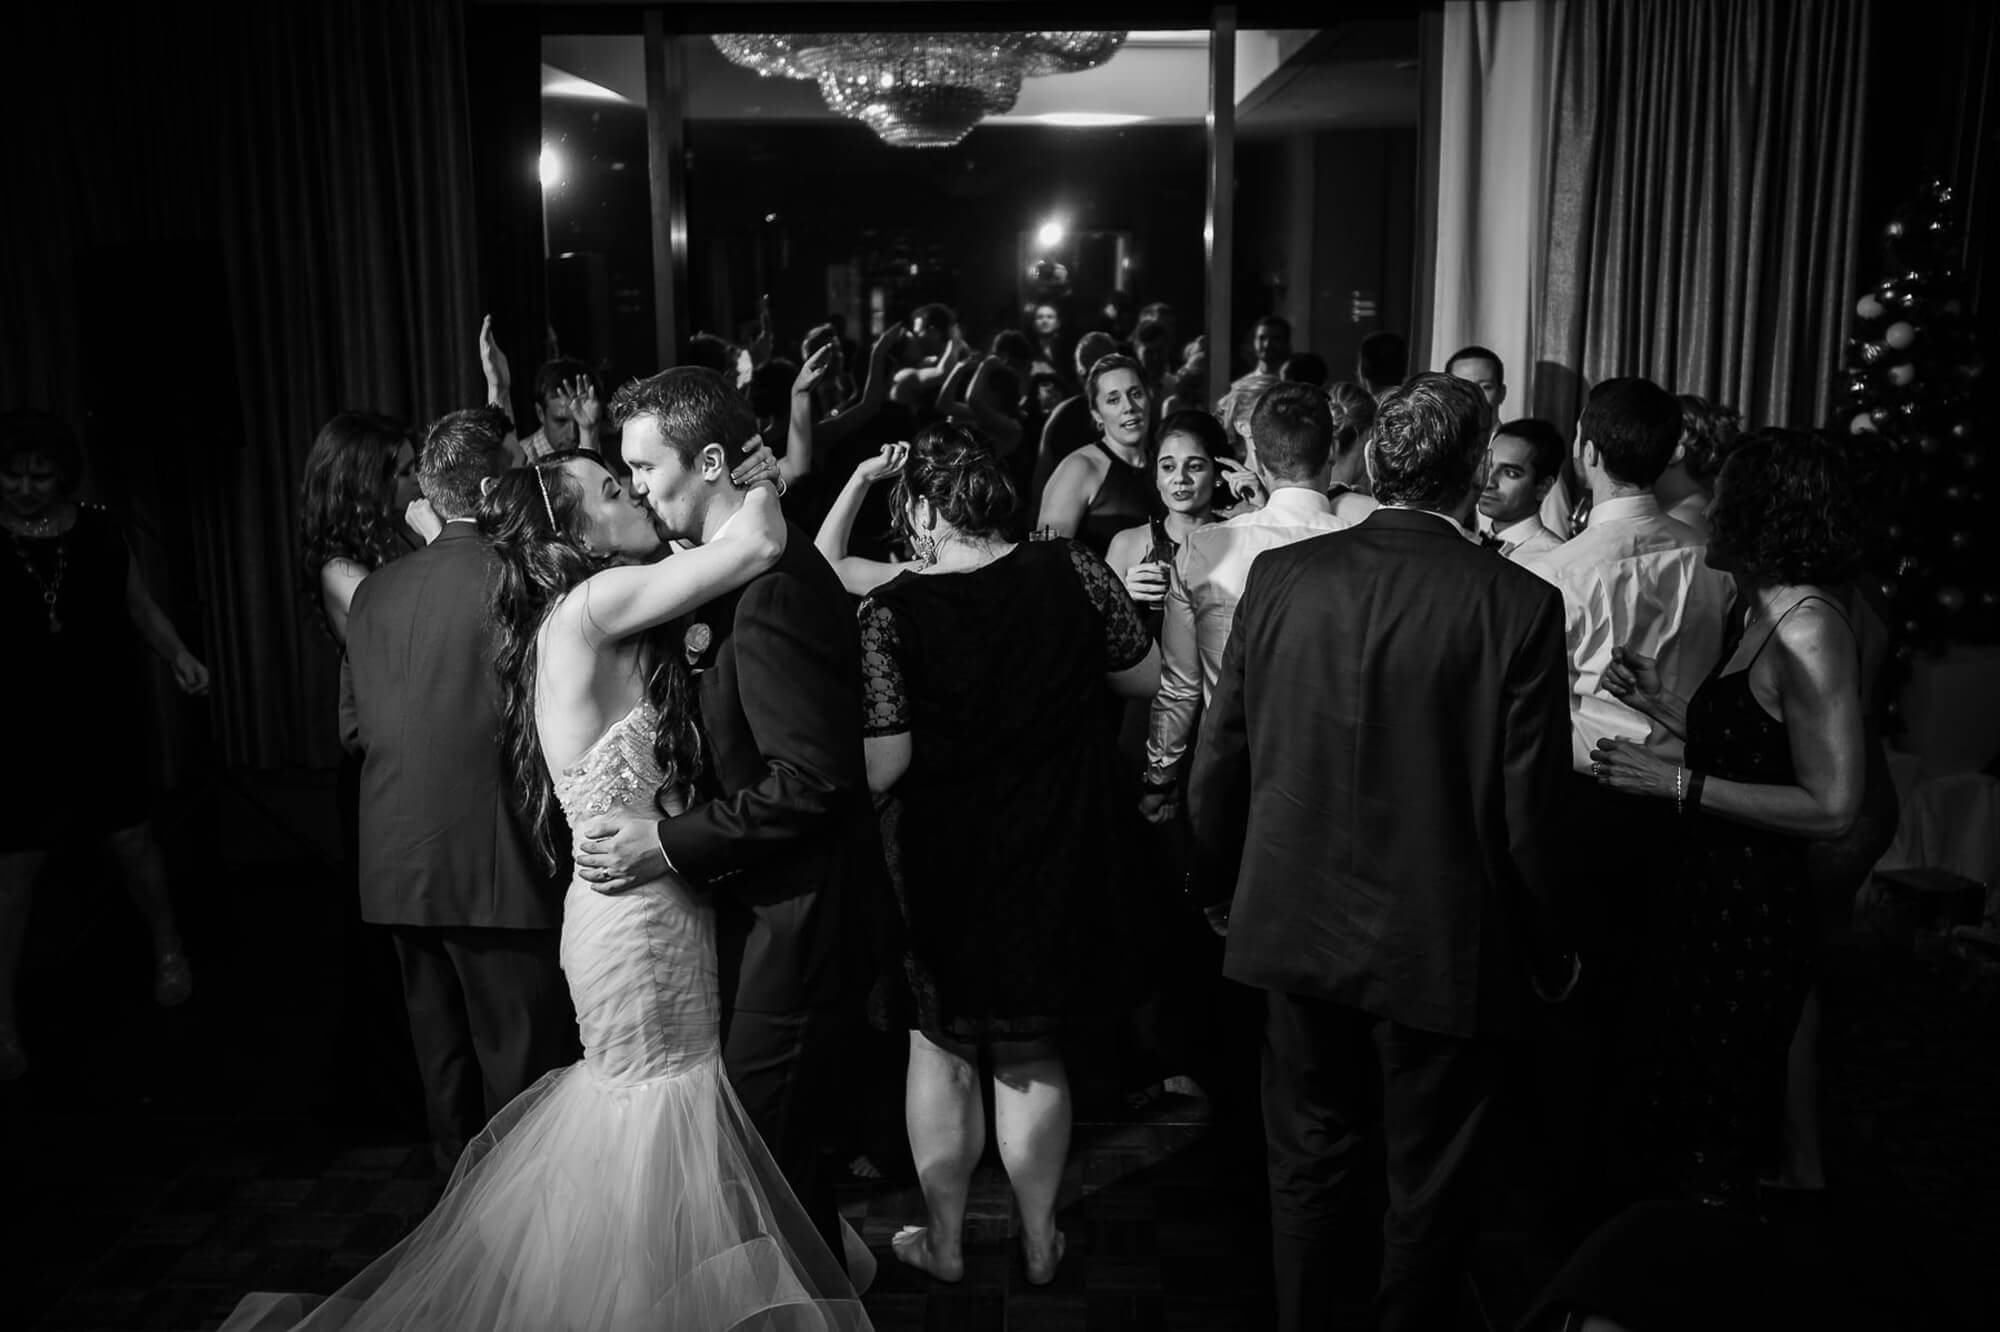 Intimate black and white portrait of the bride and groom kissing in the middle of their guests at the Fairmont Royal York, Toronto